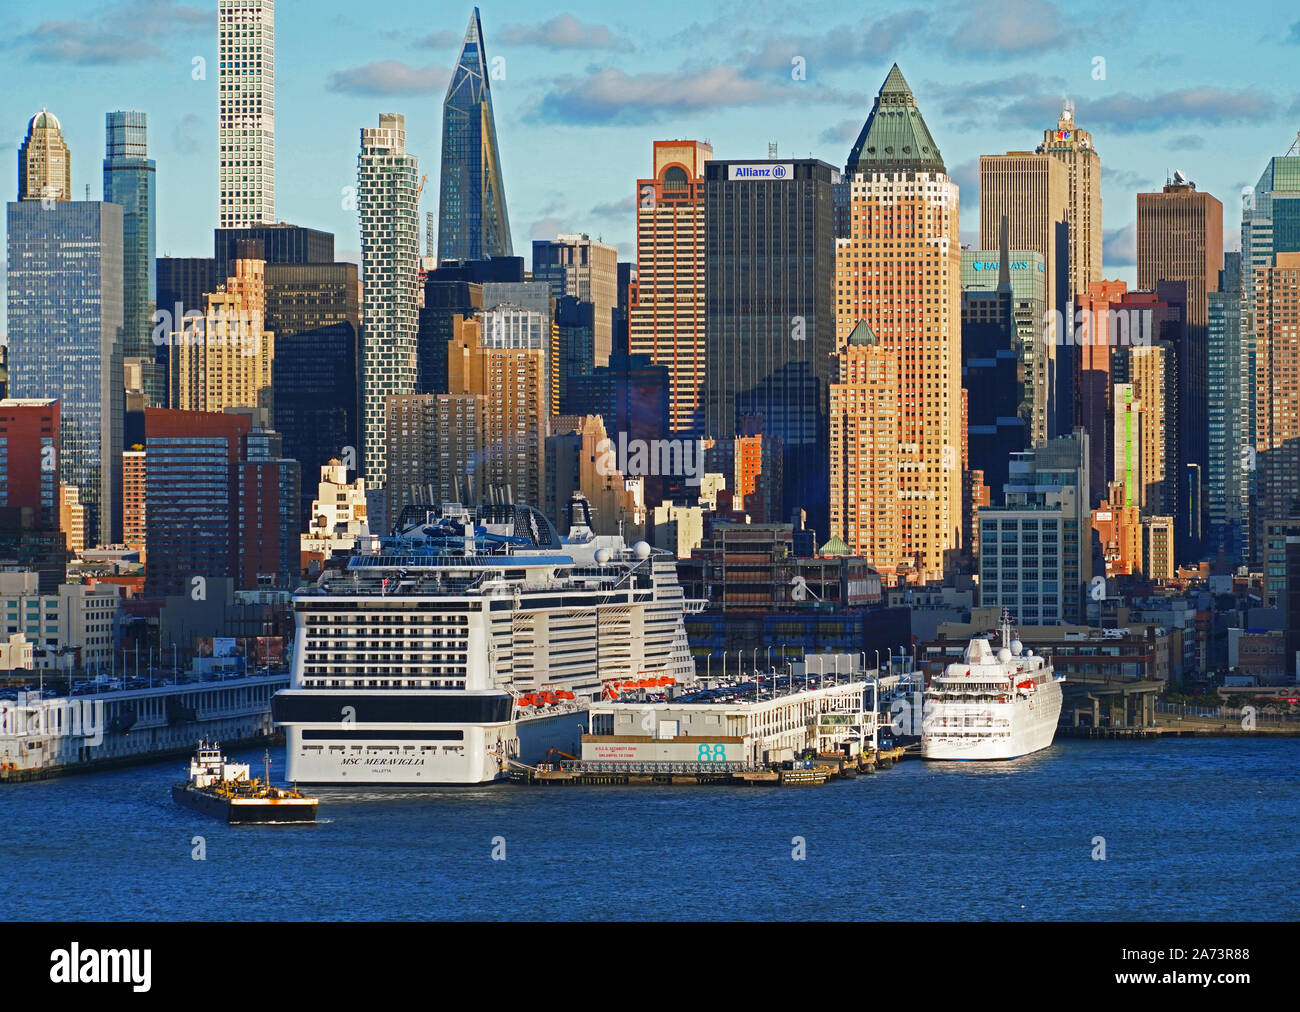 Manhattan Cruise Terminal on west side of mid-town Manhattan with mega ship MSC Meraviglia and mega yacht Silverseas' Silver Wind in port. Stock Photo